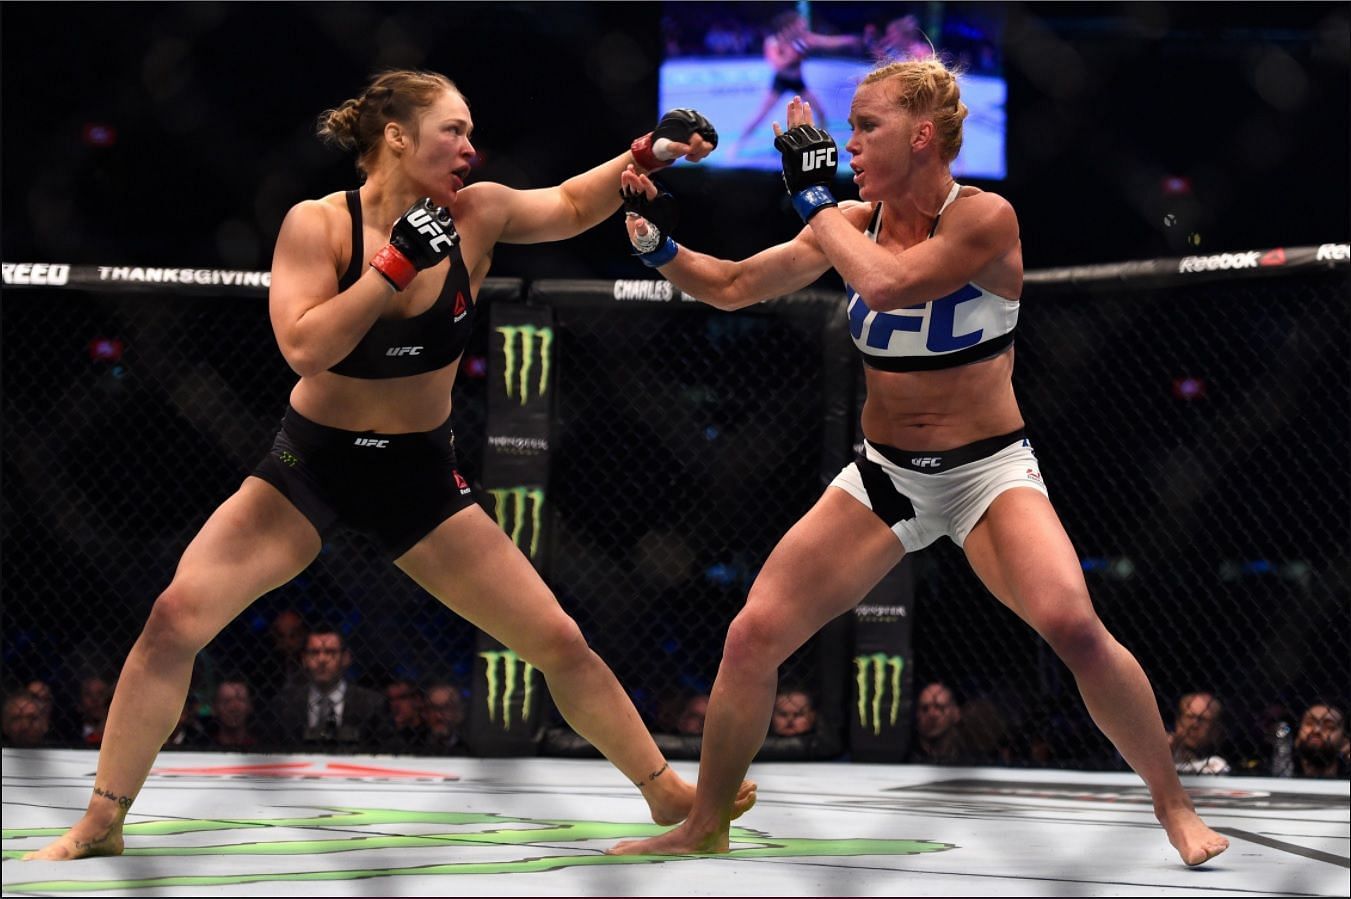 Ronda Rousey (left) and Holly Holm (right) [Image via @espnmma on Twitter]